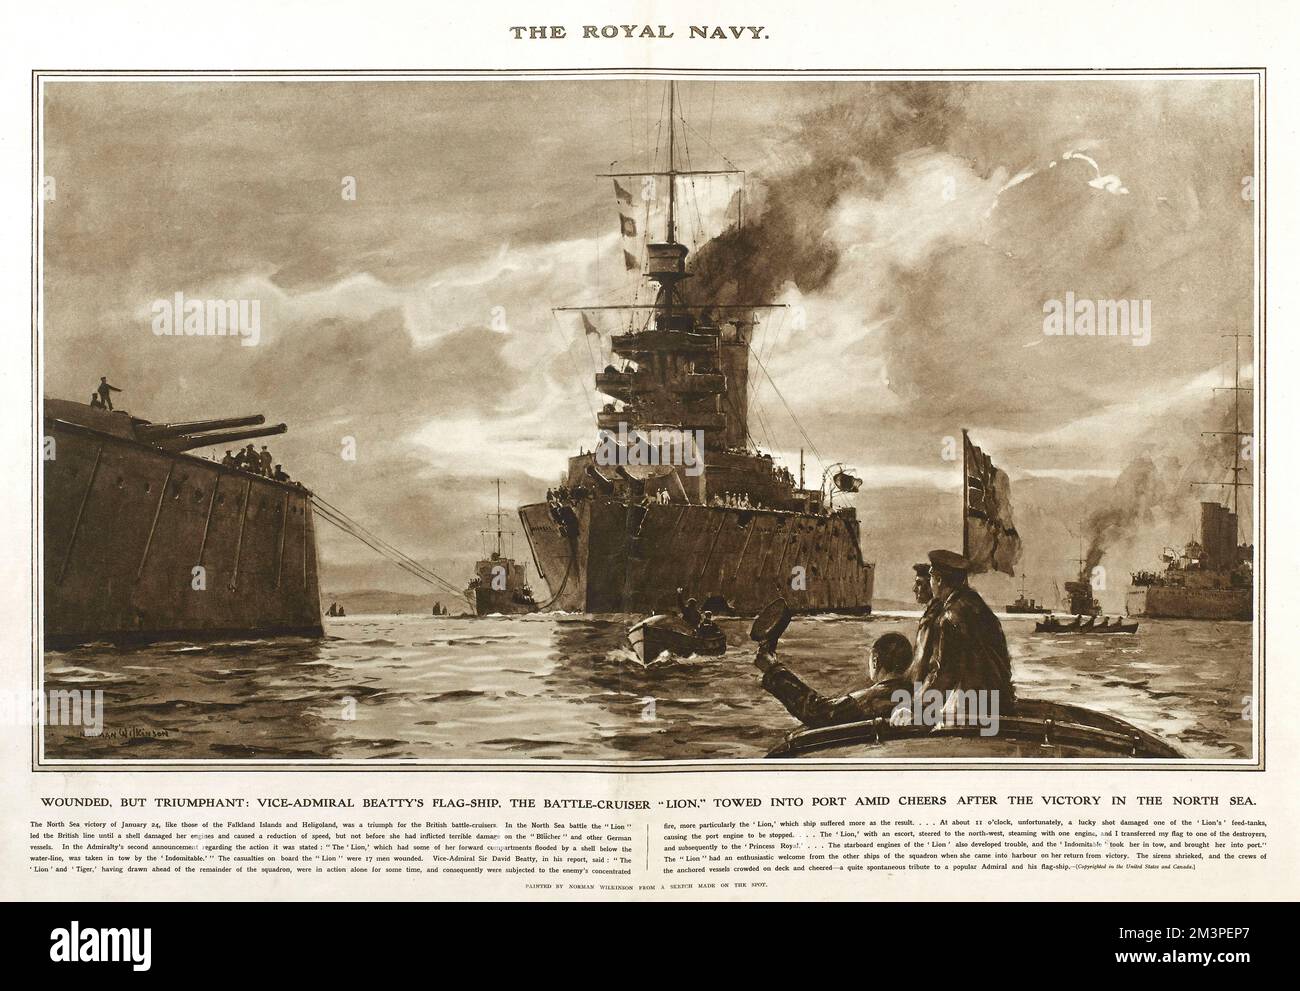 Vice-Admiral Beatty's flagship, the battle cruiser HMS Lion of the Royal Navy, towed into port amid cheers after a victory in the North Sea.  Reproduction of a painting by Norman Wilkinson in Great War Deeds, a special panorama supplement produced by the Illustrated London News in 1915, featuring heroic actions of the First World War.      Date: 1914 Stock Photo